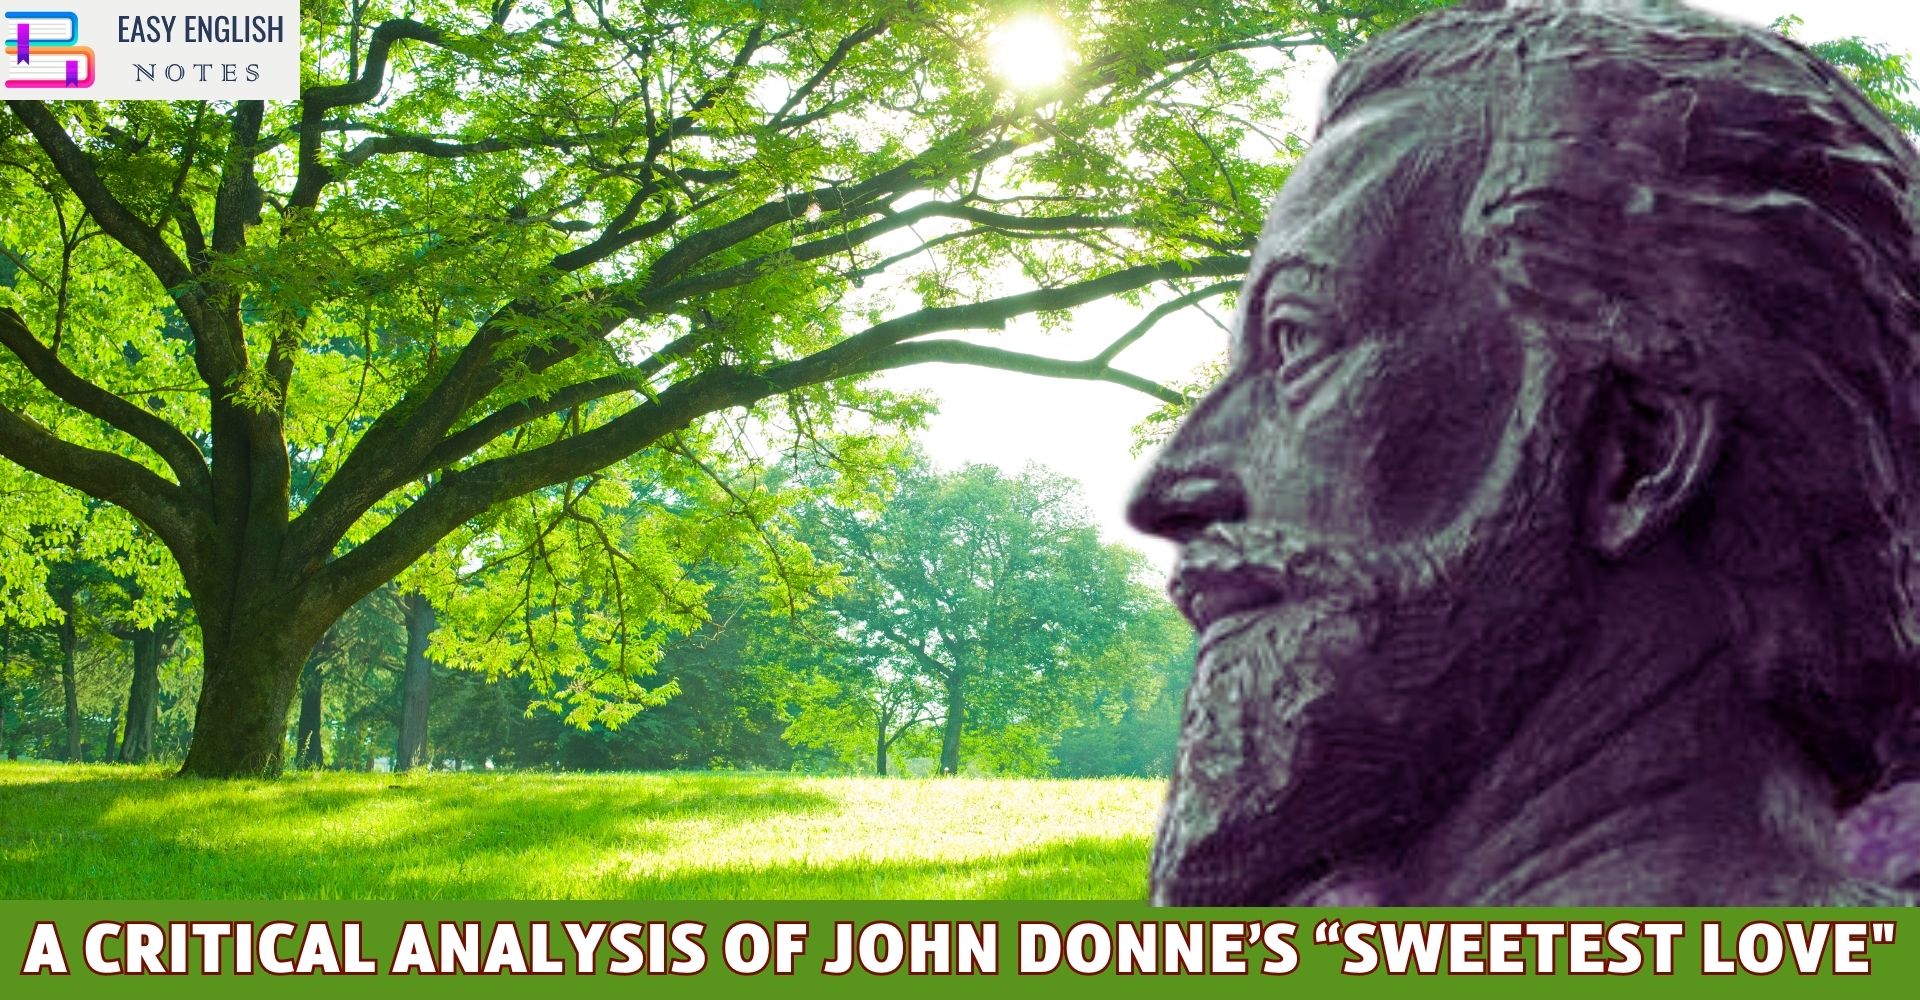 A Critical Analysis of John Donne’s “Sweetest Love"